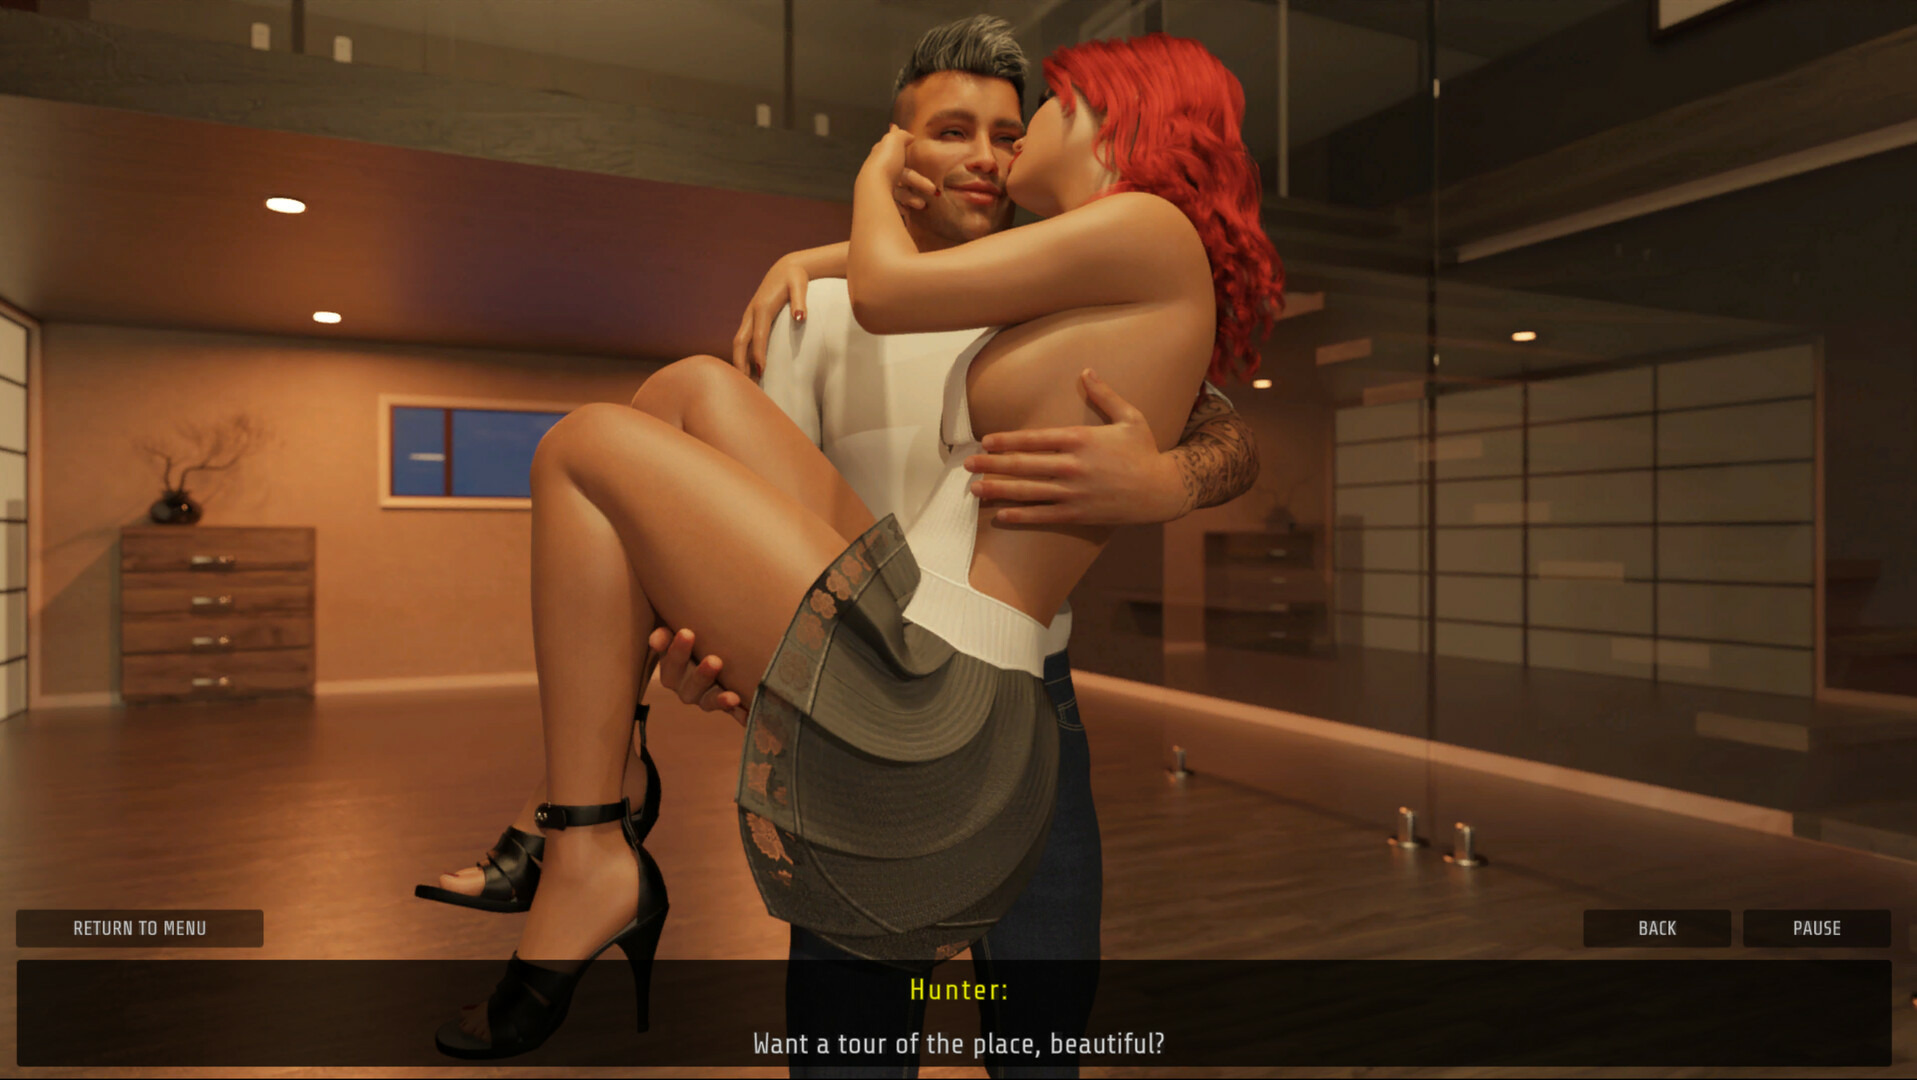 Sex Story - Ruby and Hunter - Episode 2 Steam CD Key, 1.92 usd